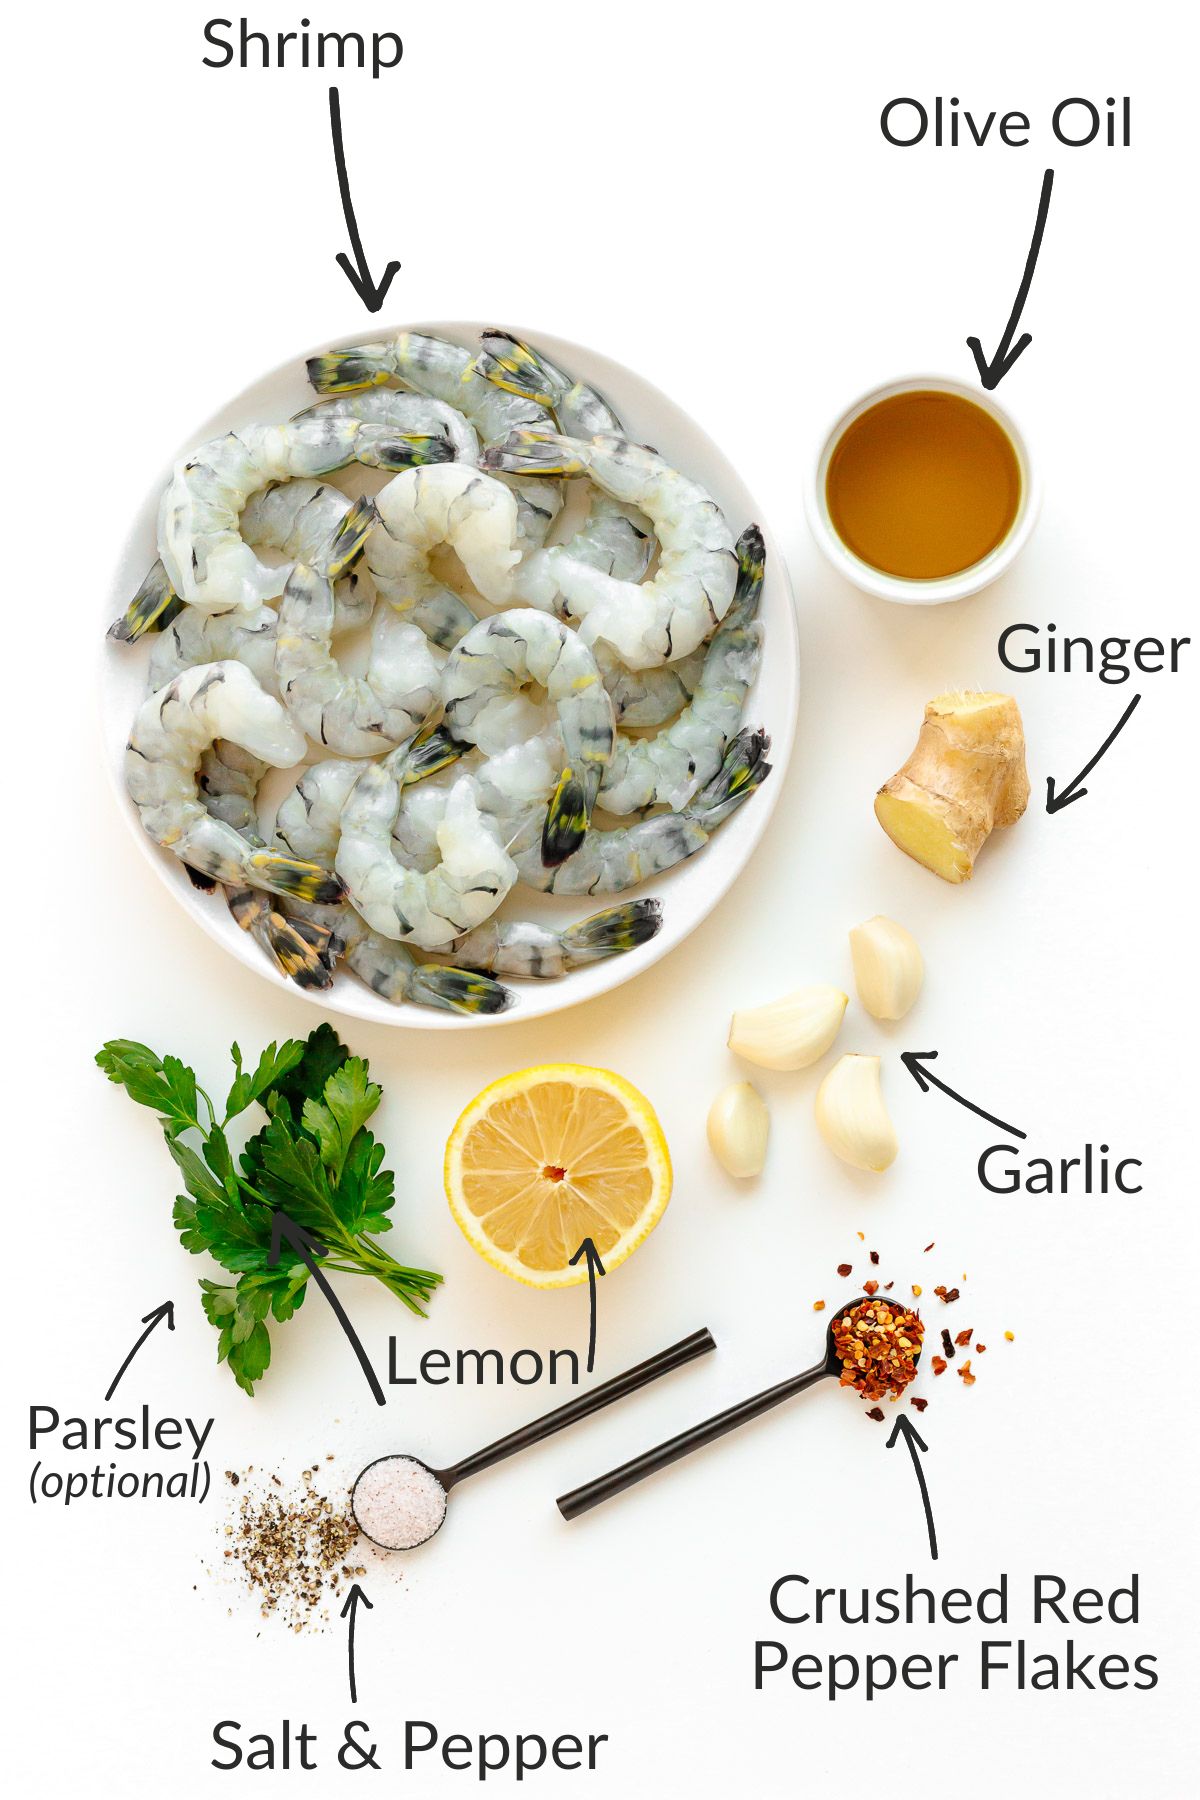 Labelled photo of ingredients needed to make this pan seared shrimp recipe.